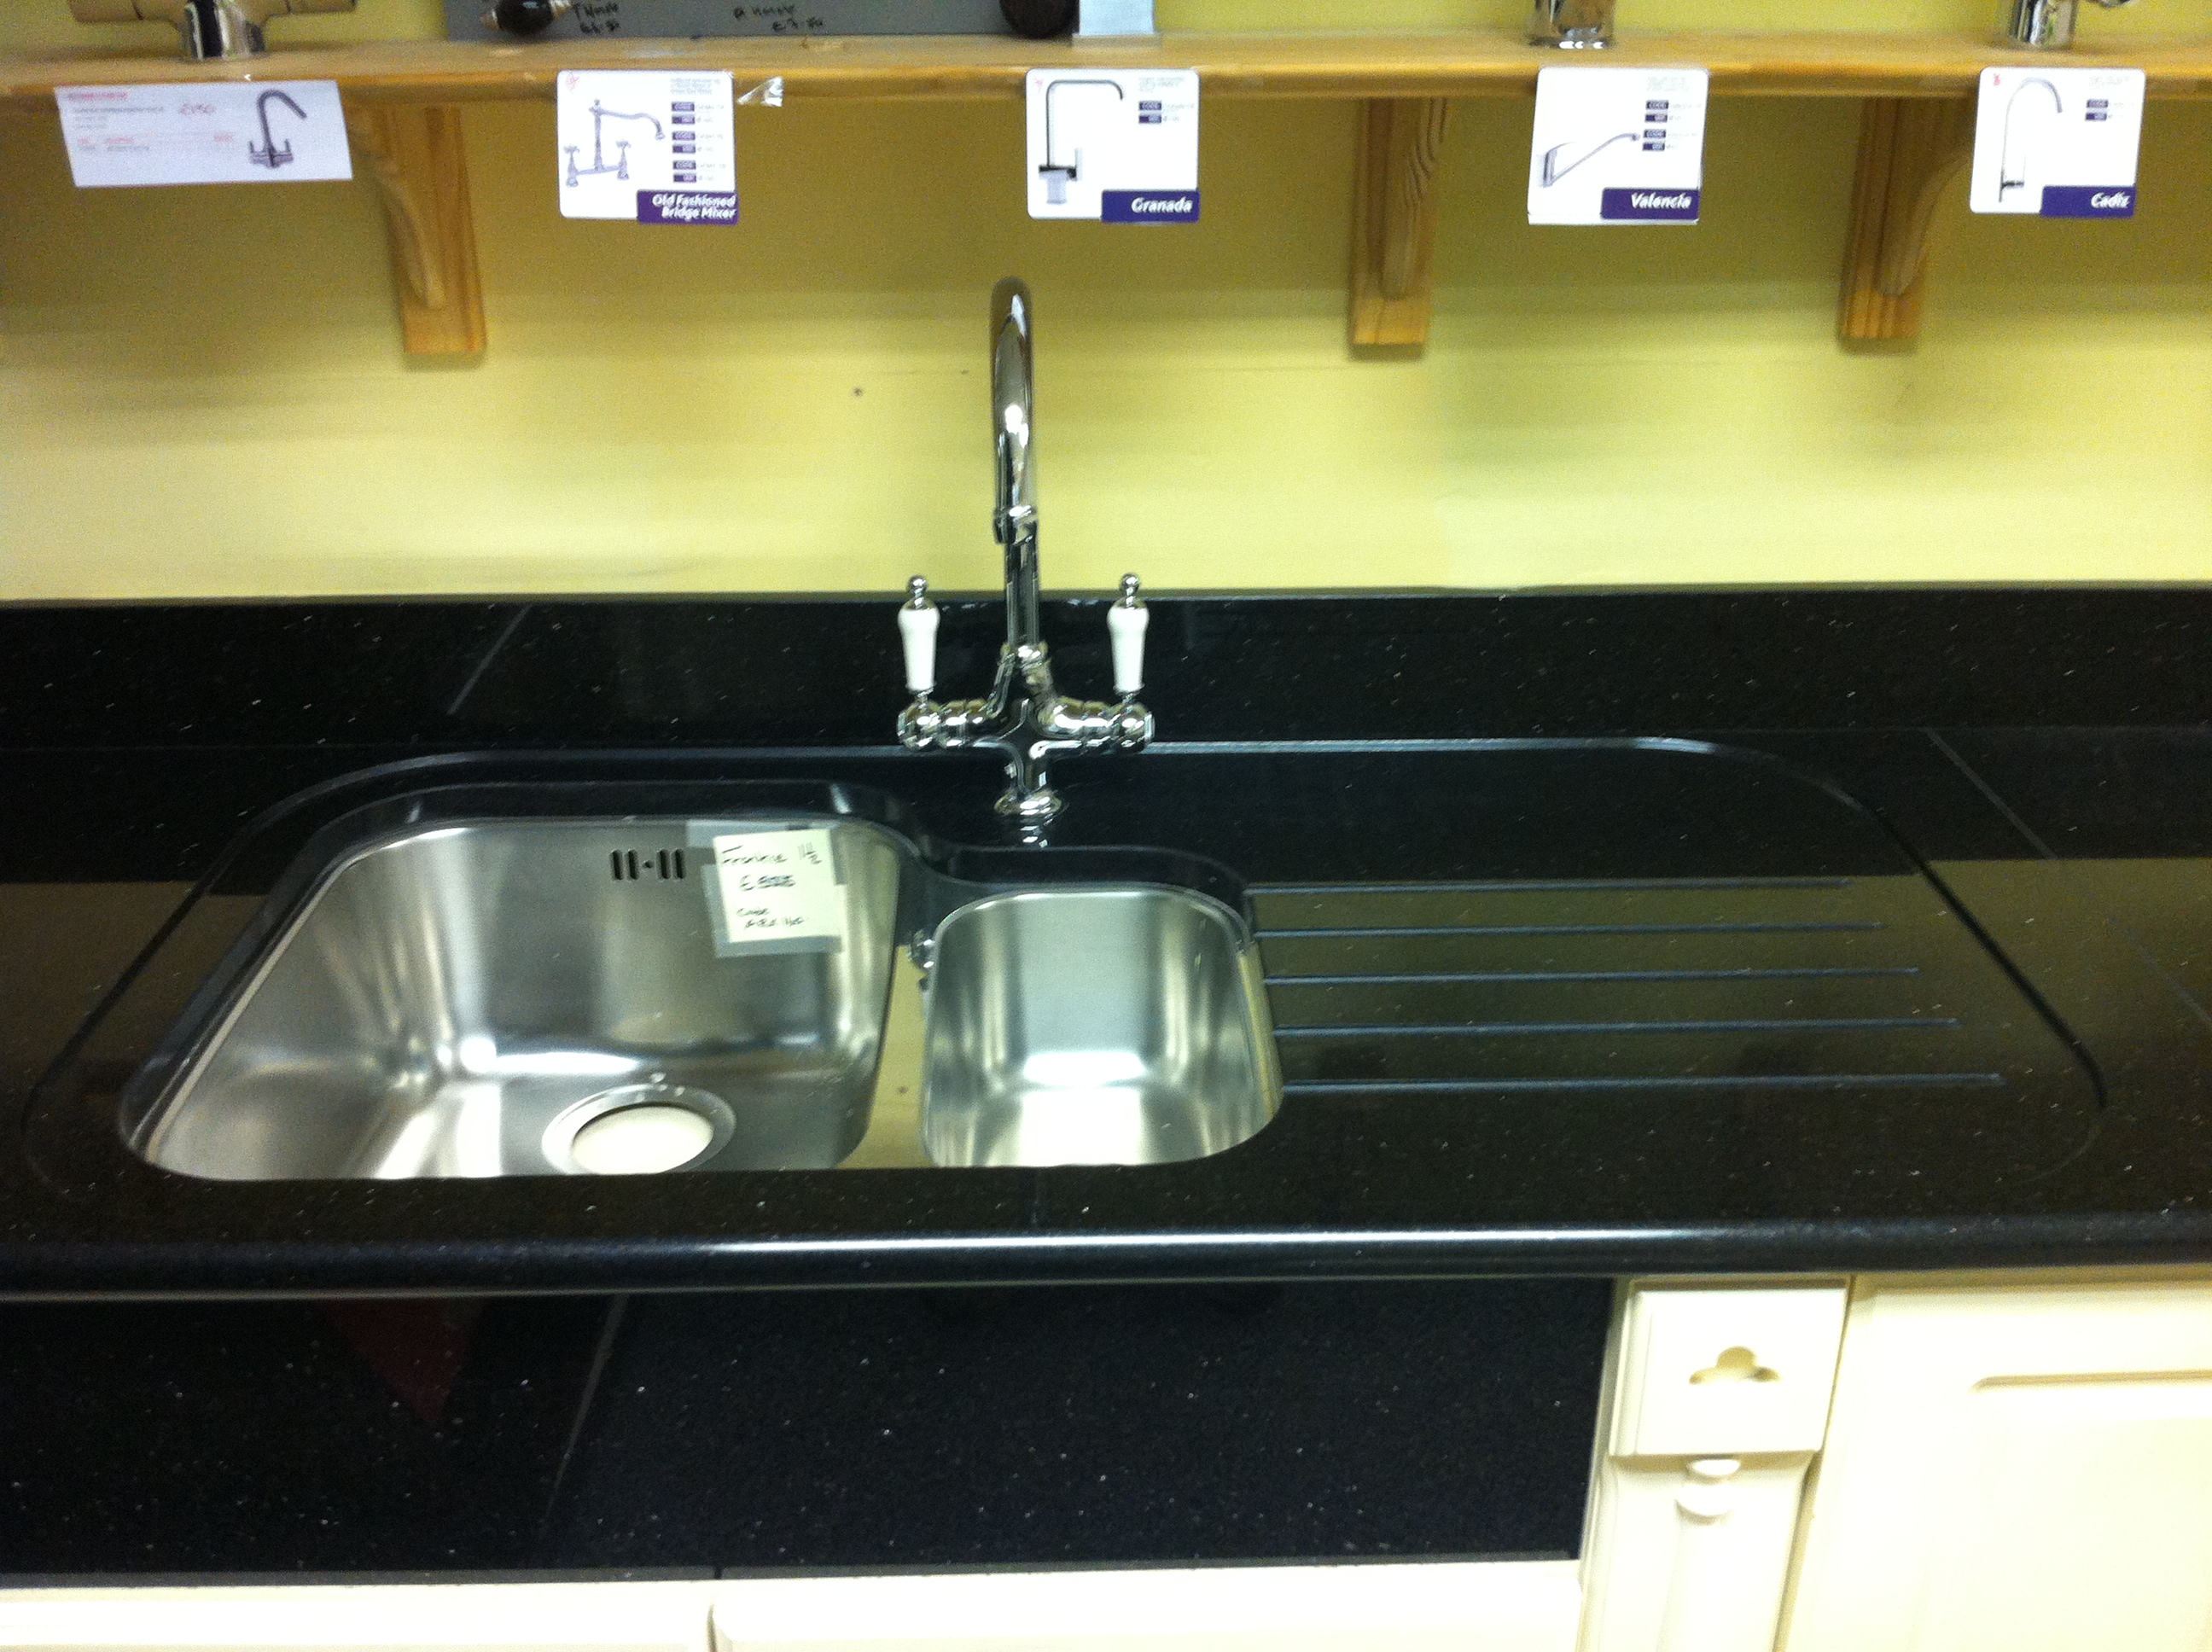 Star Galaxy Worktop with Recess Drainer and Undermounted Sink